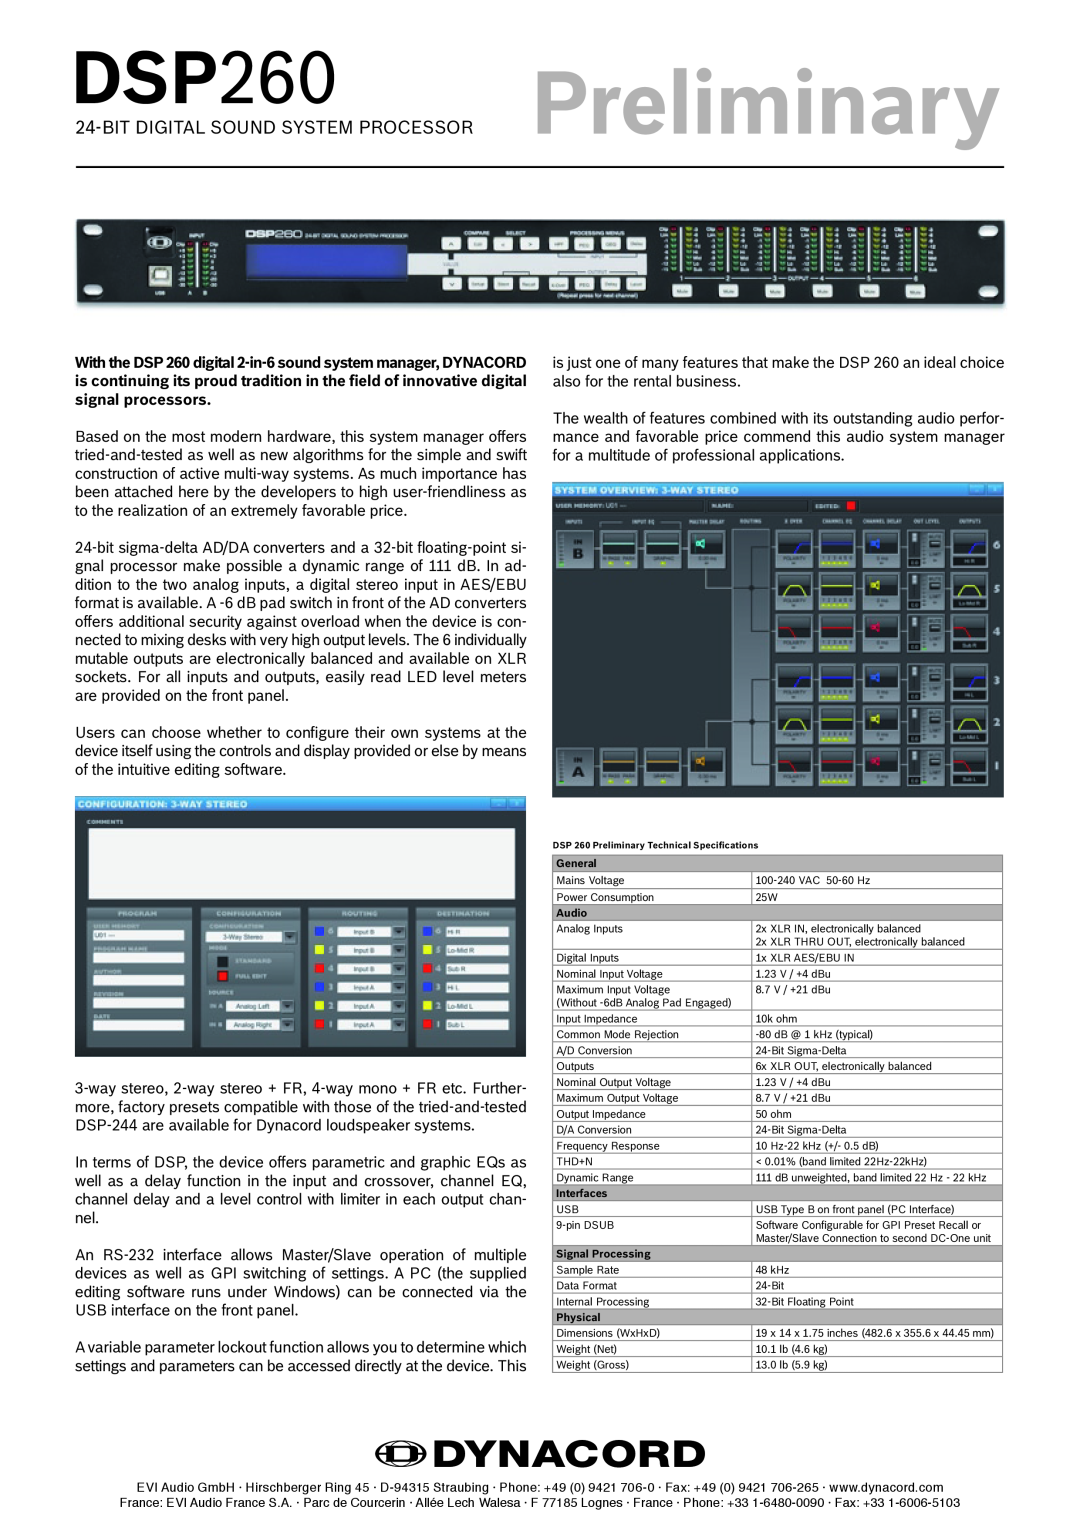 Dynacord DSP 260 technical specifications Preliminary, DSP260, Bit Digital Sound System Processor 